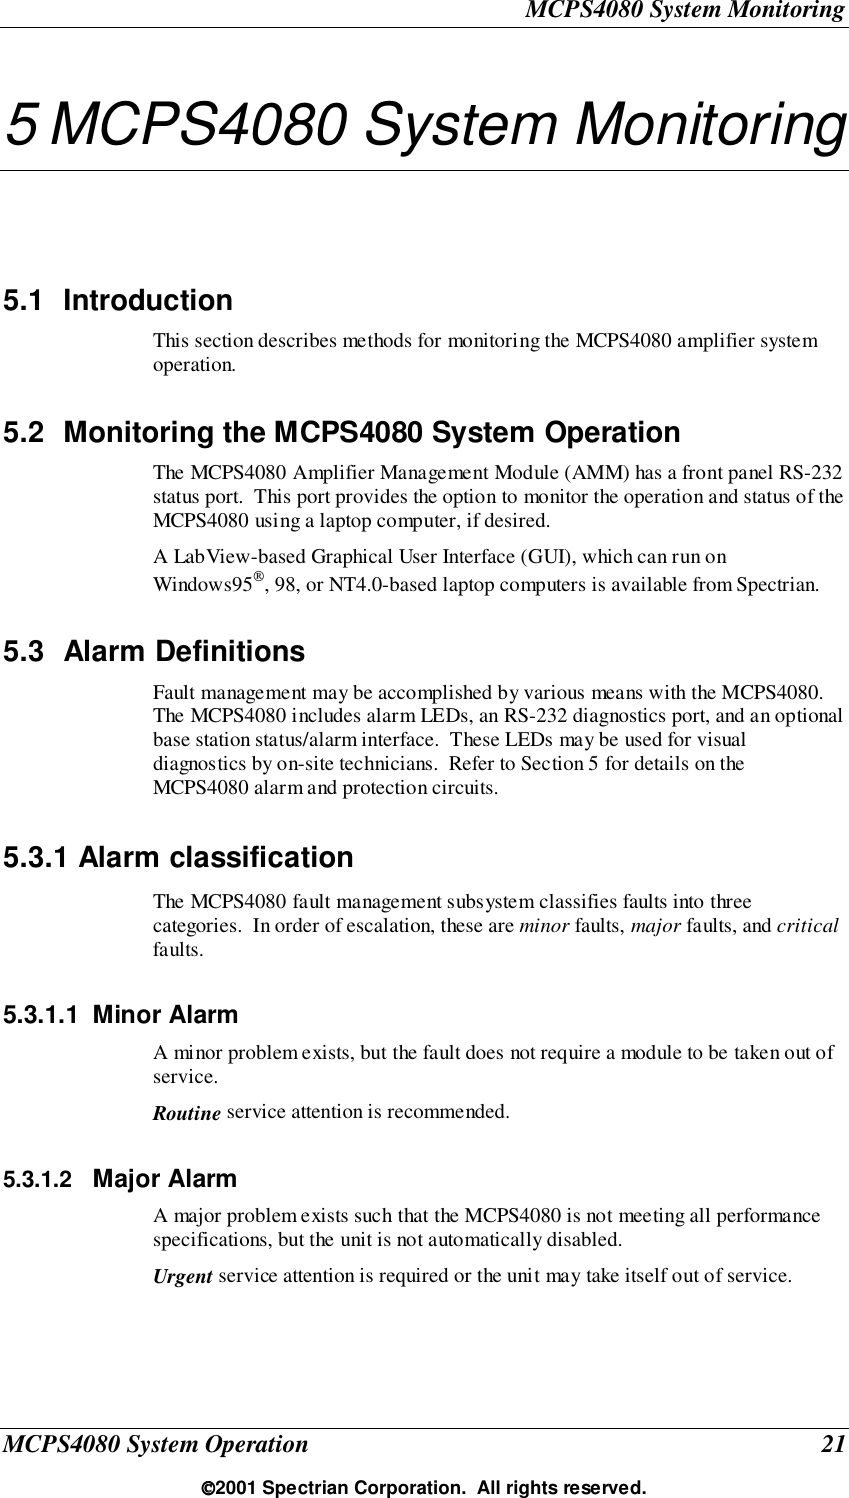 MCPS4080 System MonitoringMCPS4080 System Operation 212001 Spectrian Corporation.  All rights reserved.5 MCPS4080 System Monitoring5.1 IntroductionThis section describes methods for monitoring the MCPS4080 amplifier systemoperation.5.2  Monitoring the MCPS4080 System OperationThe MCPS4080 Amplifier Management Module (AMM) has a front panel RS-232status port.  This port provides the option to monitor the operation and status of theMCPS4080 using a laptop computer, if desired.A LabView-based Graphical User Interface (GUI), which can run onWindows95, 98, or NT4.0-based laptop computers is available from Spectrian.5.3 Alarm DefinitionsFault management may be accomplished by various means with the MCPS4080.The MCPS4080 includes alarm LEDs, an RS-232 diagnostics port, and an optionalbase station status/alarm interface.  These LEDs may be used for visualdiagnostics by on-site technicians.  Refer to Section 5 for details on theMCPS4080 alarm and protection circuits.5.3.1 Alarm classificationThe MCPS4080 fault management subsystem classifies faults into threecategories.  In order of escalation, these are minor faults, major faults, and criticalfaults.5.3.1.1 Minor AlarmA minor problem exists, but the fault does not require a module to be taken out ofservice.Routine service attention is recommended.5.3.1.2  Major AlarmA major problem exists such that the MCPS4080 is not meeting all performancespecifications, but the unit is not automatically disabled.Urgent service attention is required or the unit may take itself out of service.